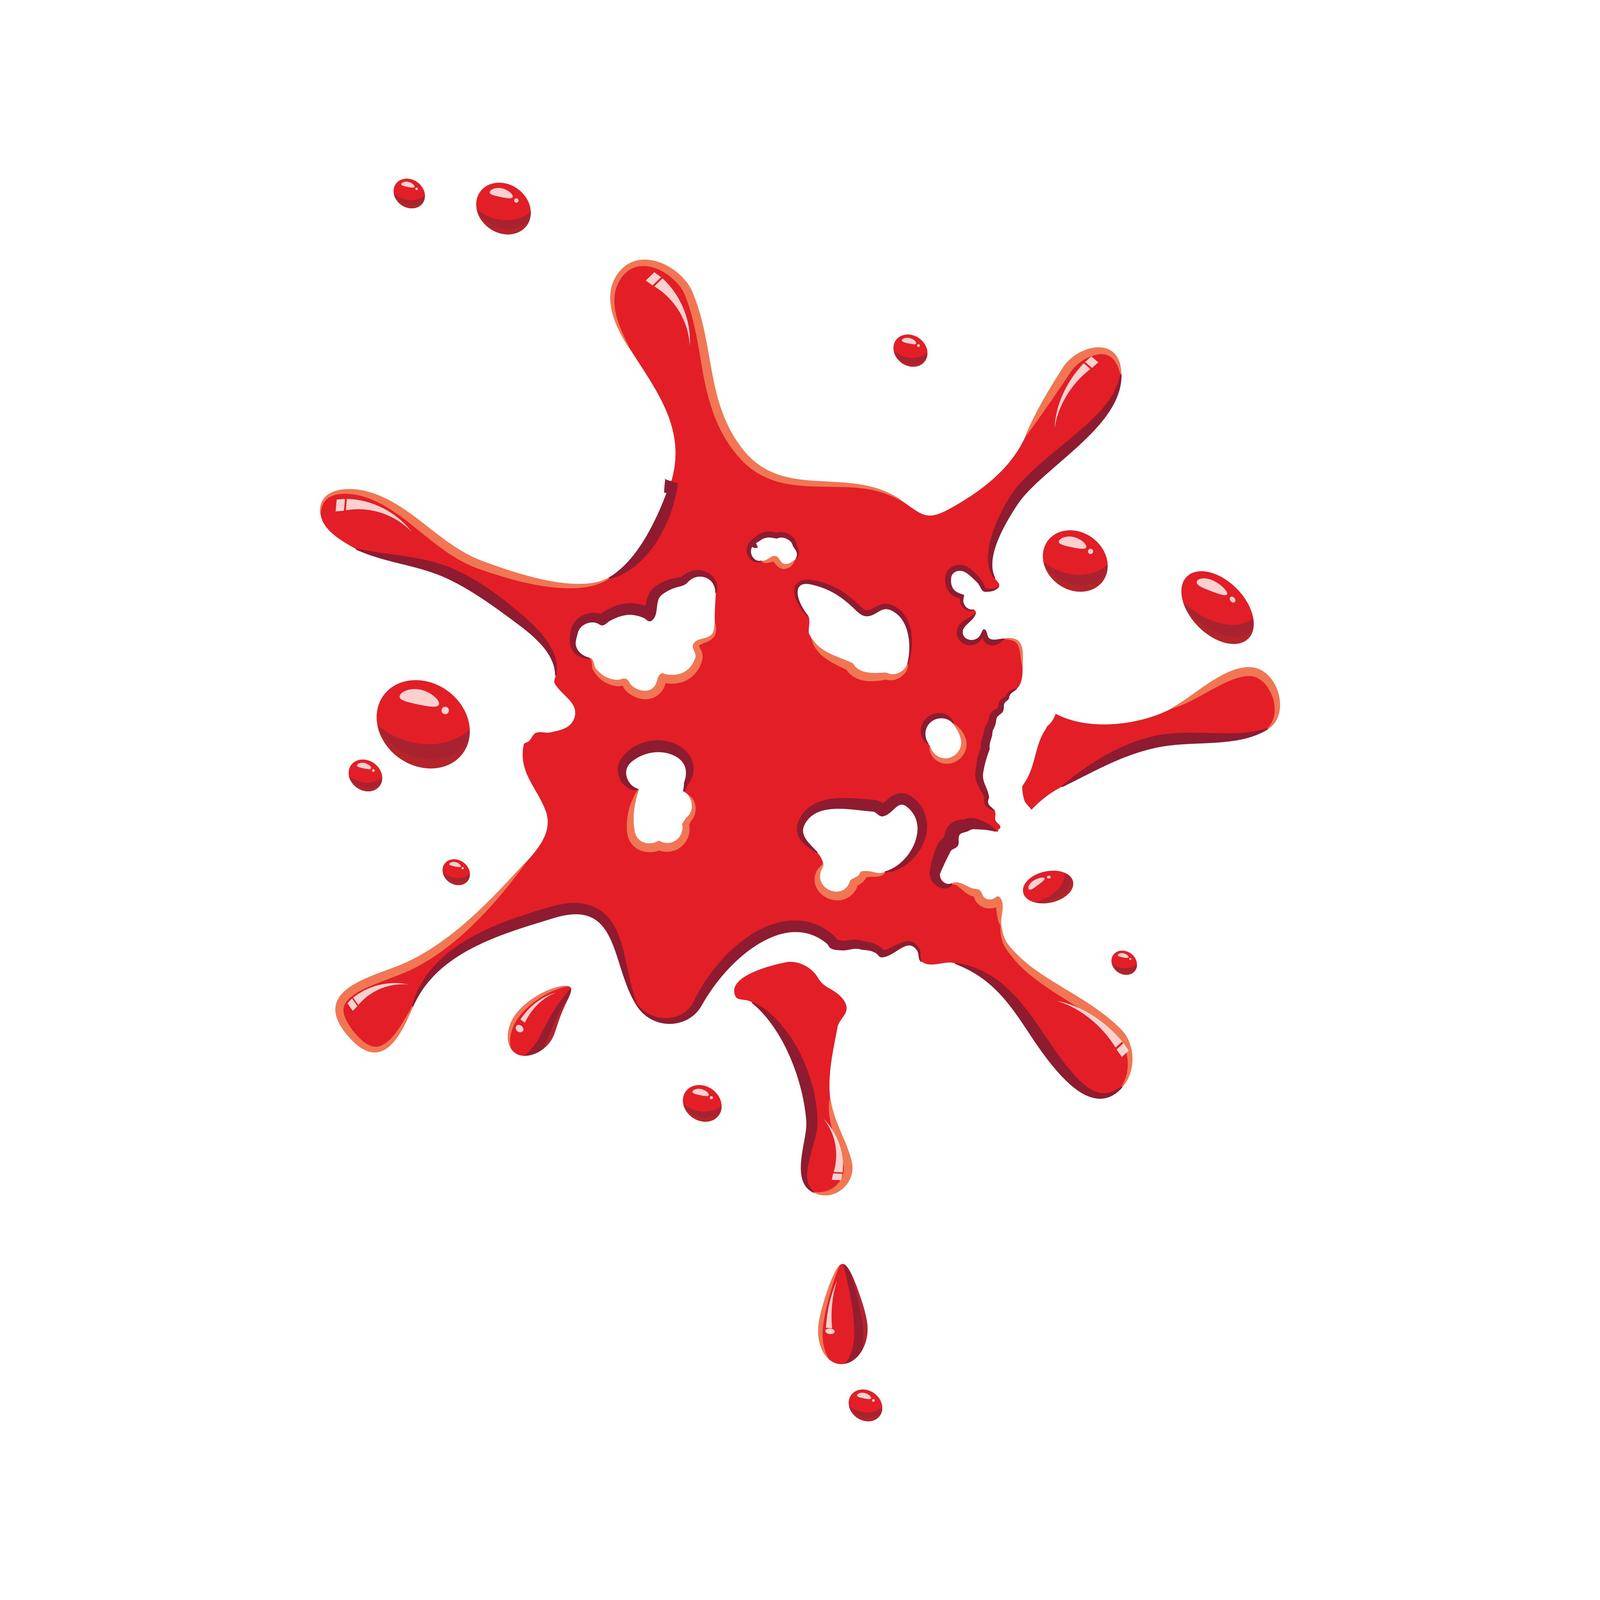 Small spot of blood icon isolated on white background. Liquid symbol